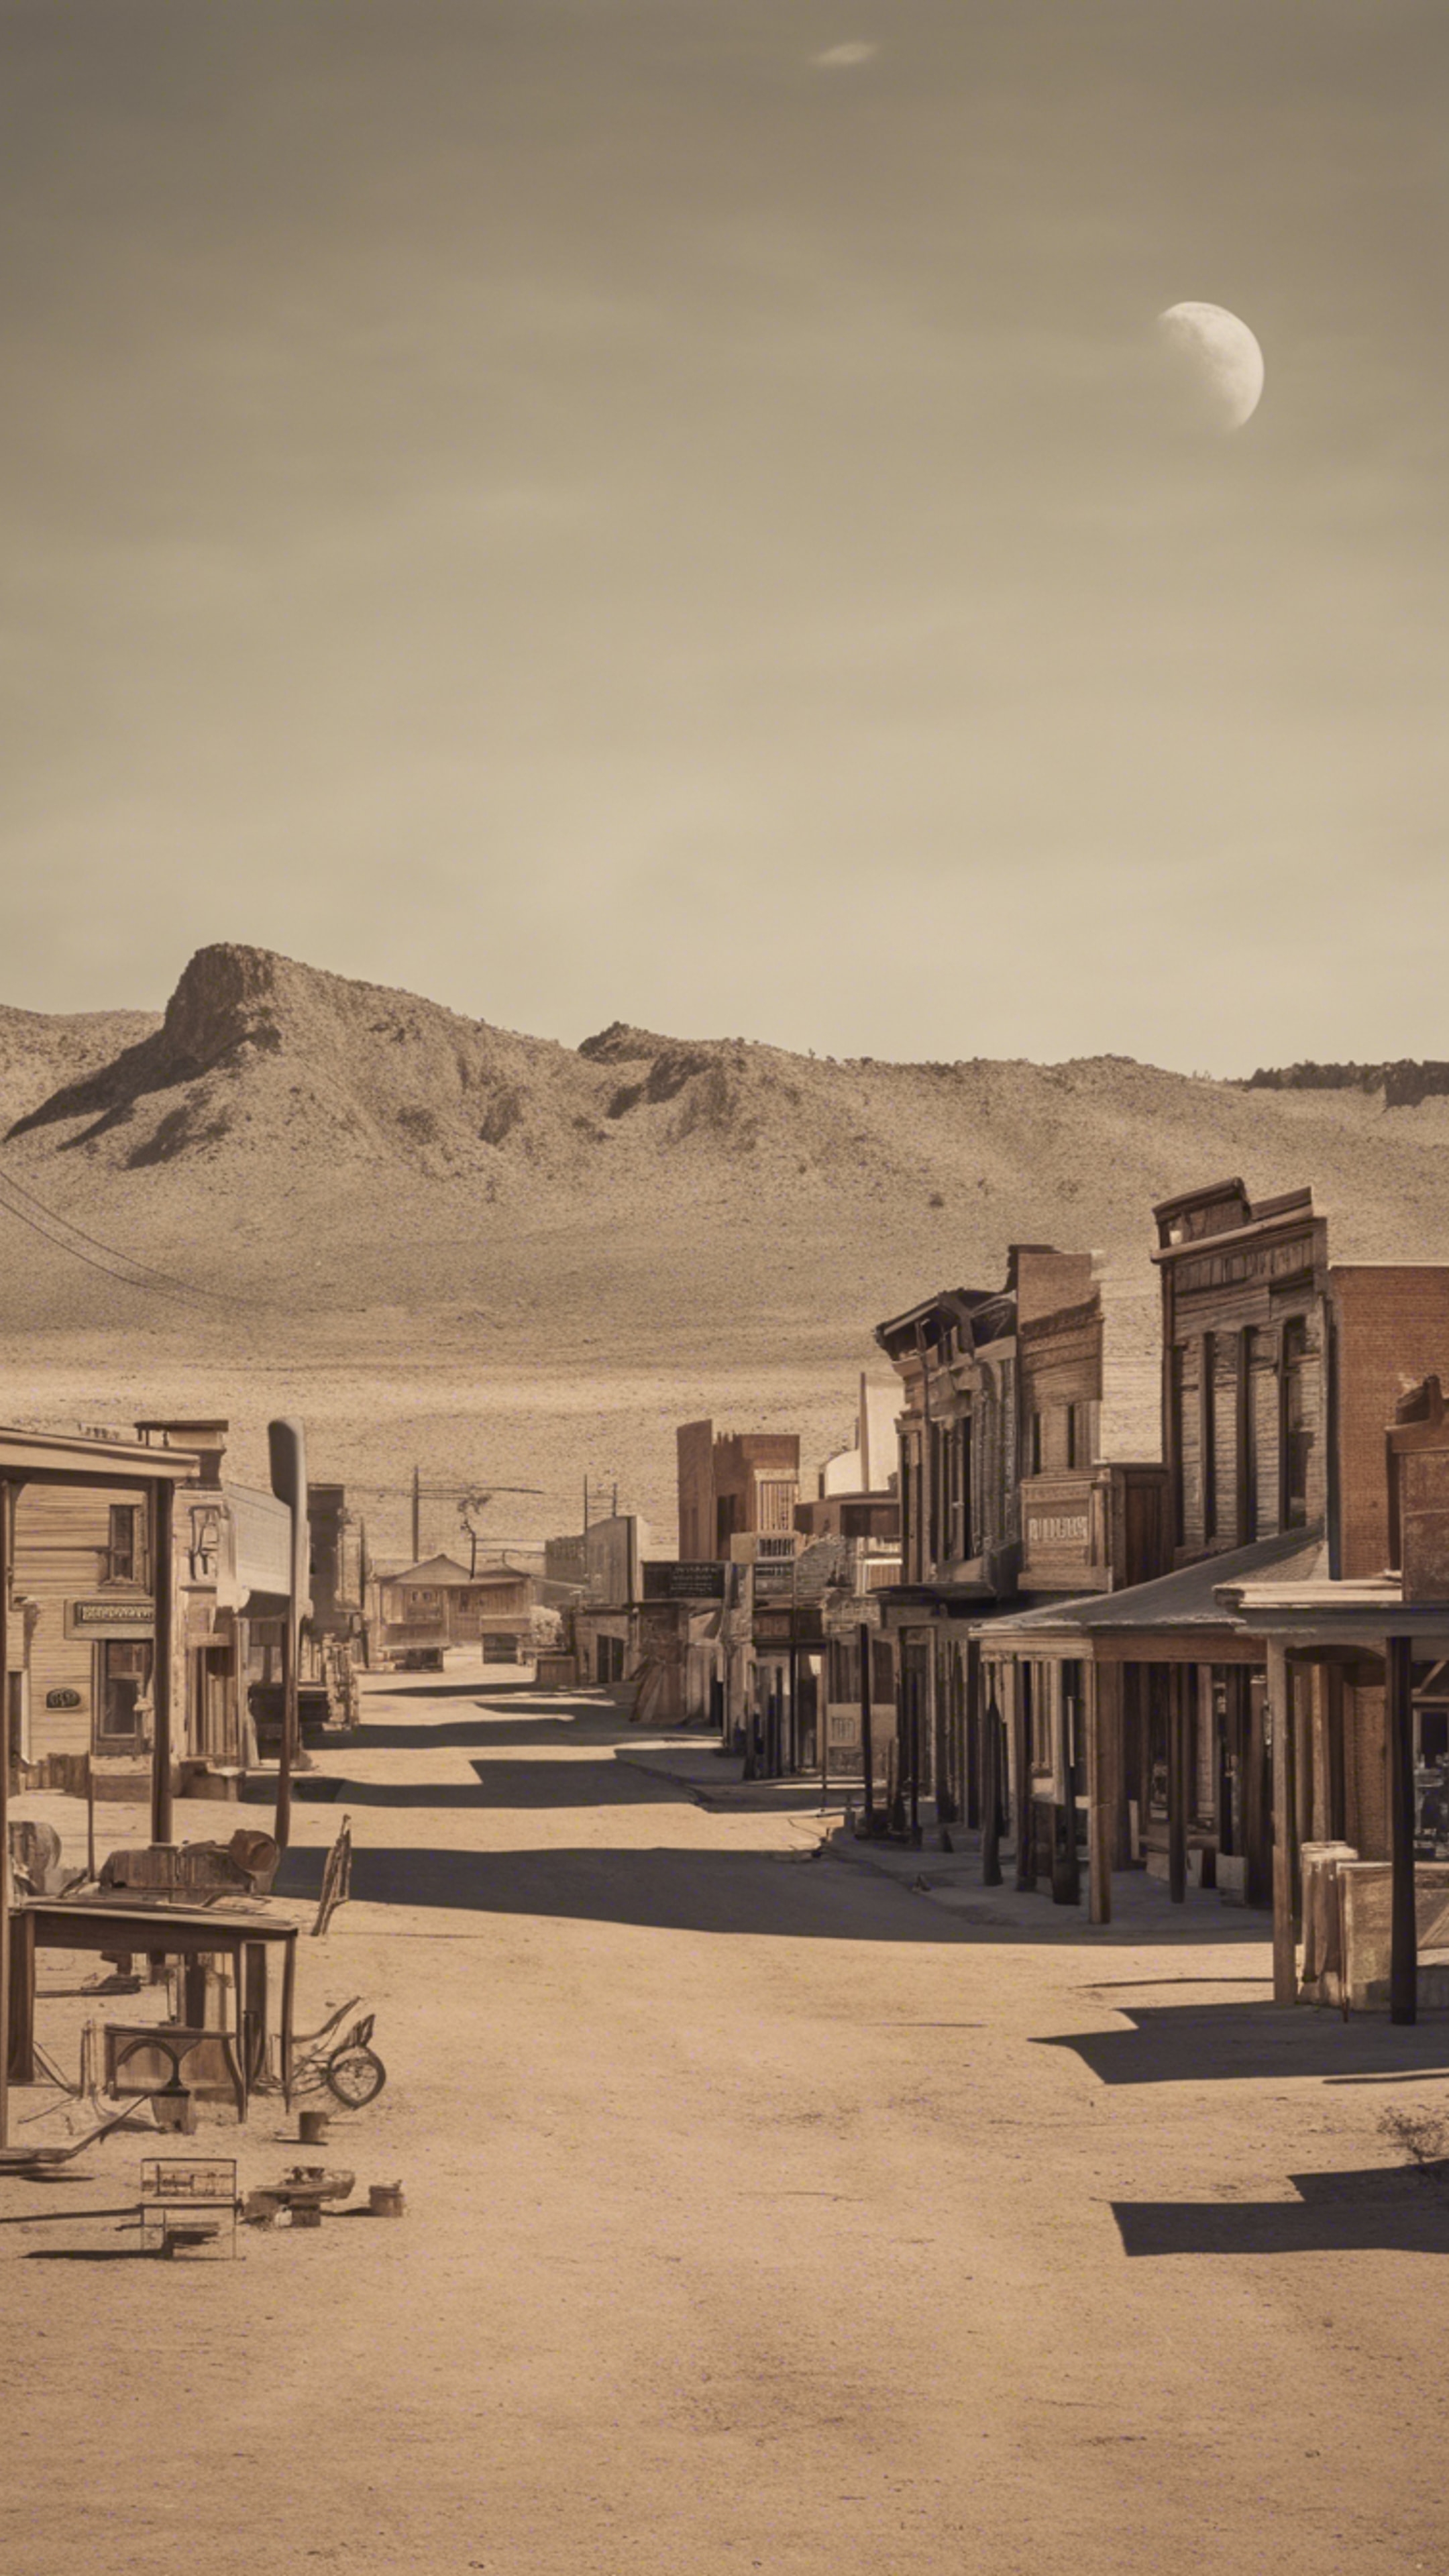 A nostalgic portrayal of a deserted old western town skyline at high noon. Tapeta[6f3773f399464a7985e4]